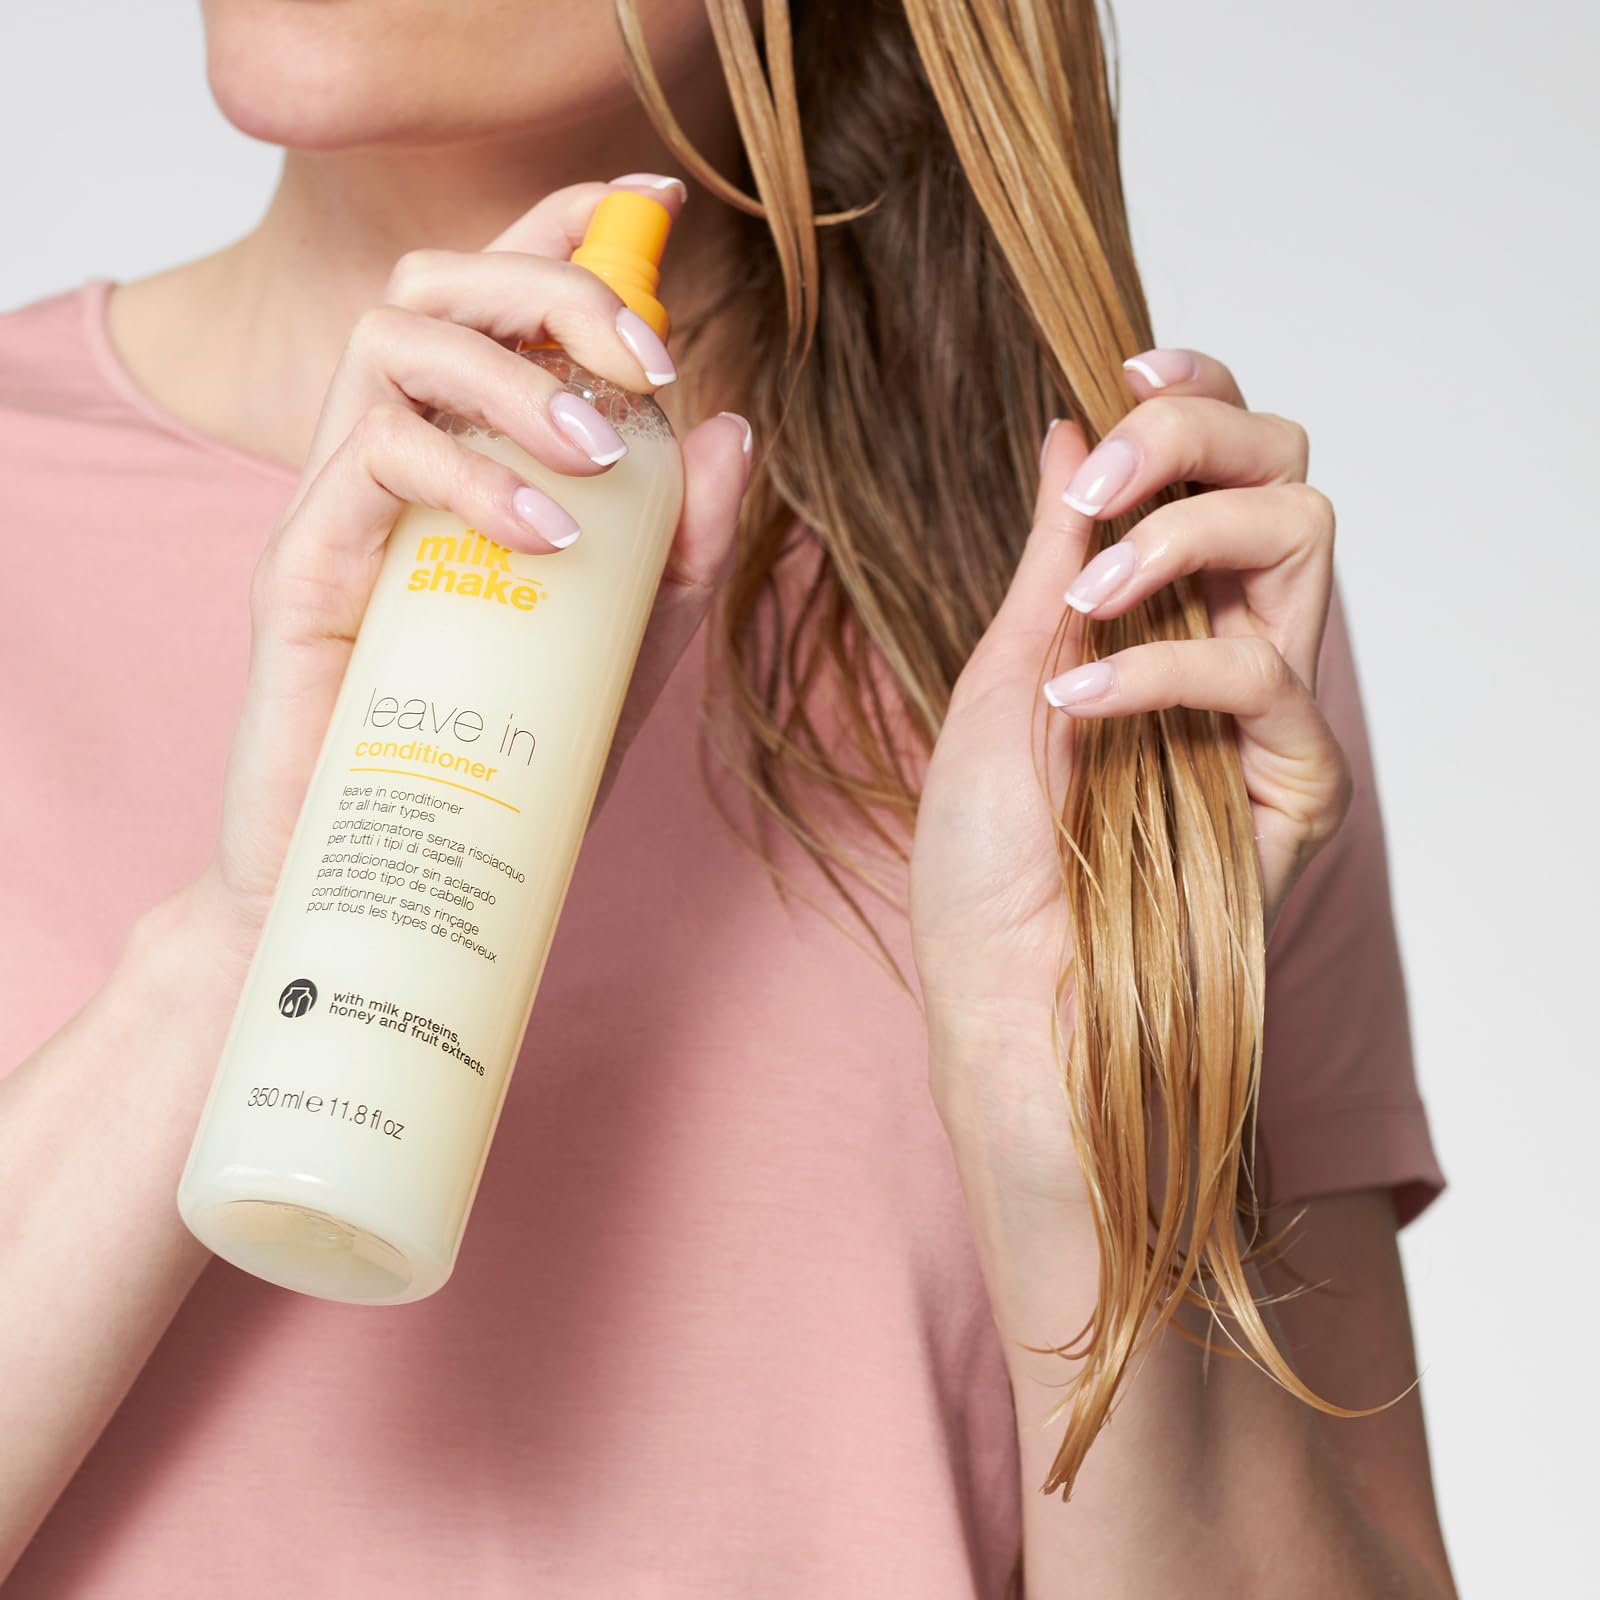 milk_shake Leave-In Conditioner Spray Detangler for Natural Hair - Protects Color Treated Hair and Hydrates Dry Hair - Leave In Conditioner For Soft and Shiny Straight or Curly Hair, 11.8 Fl Oz